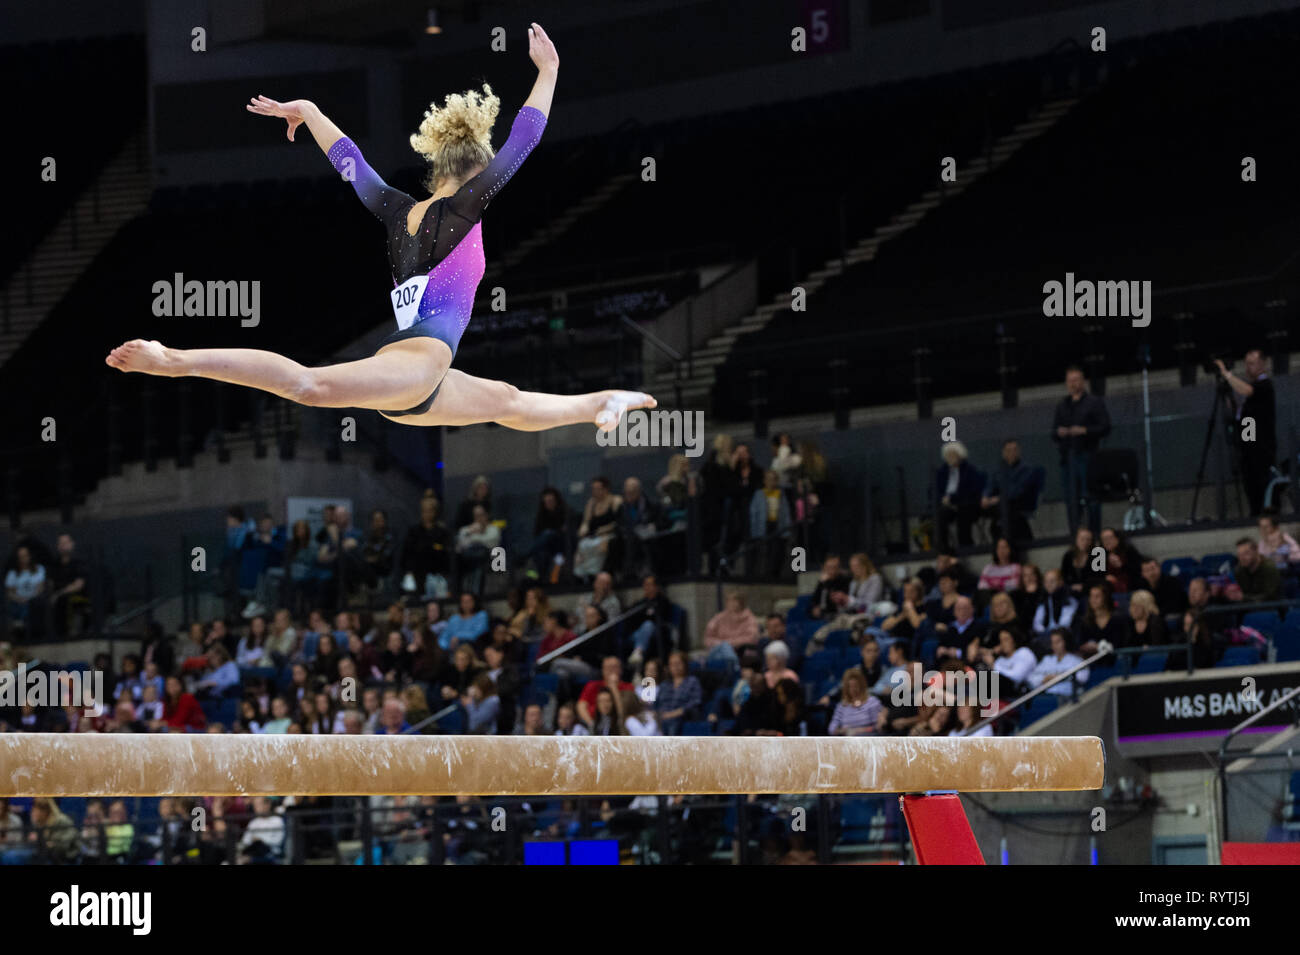 Liverpool, UK. 15th Mar, 2019. Taylor Richardson of Dynamic Gymnastics competing during the beam rotation at the Men's and Women's Artistic British Championships 2019, M&S Bank Arena, Liverpool, UK. Credit: Iain Scott Photography/Alamy Live News Stock Photo